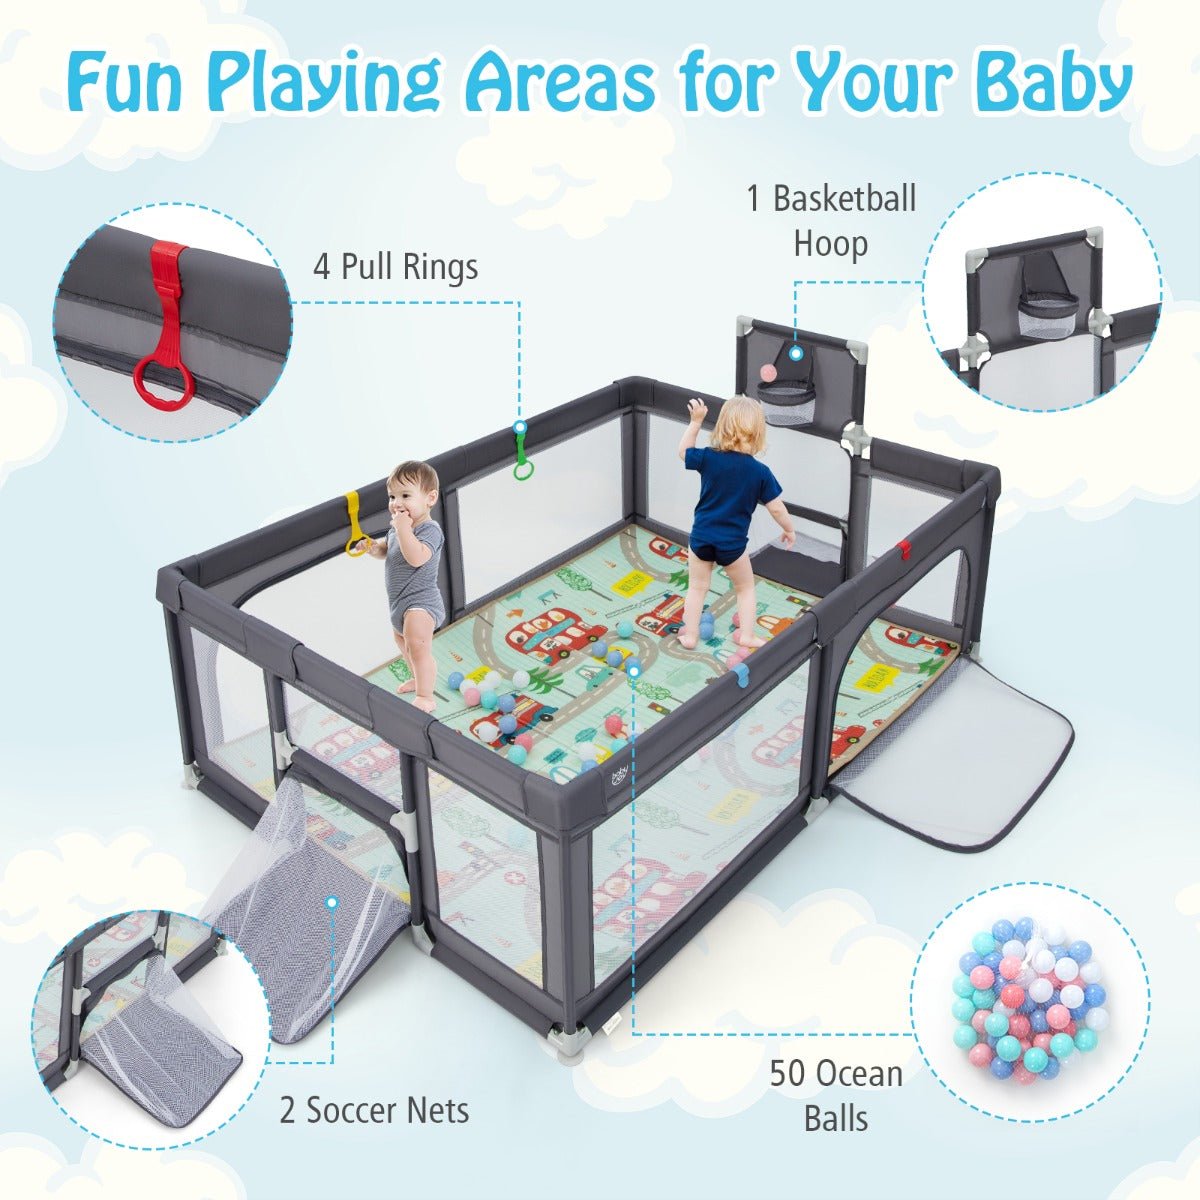 Enhance Playtime with the Grey Baby Playpen - Buy Now!